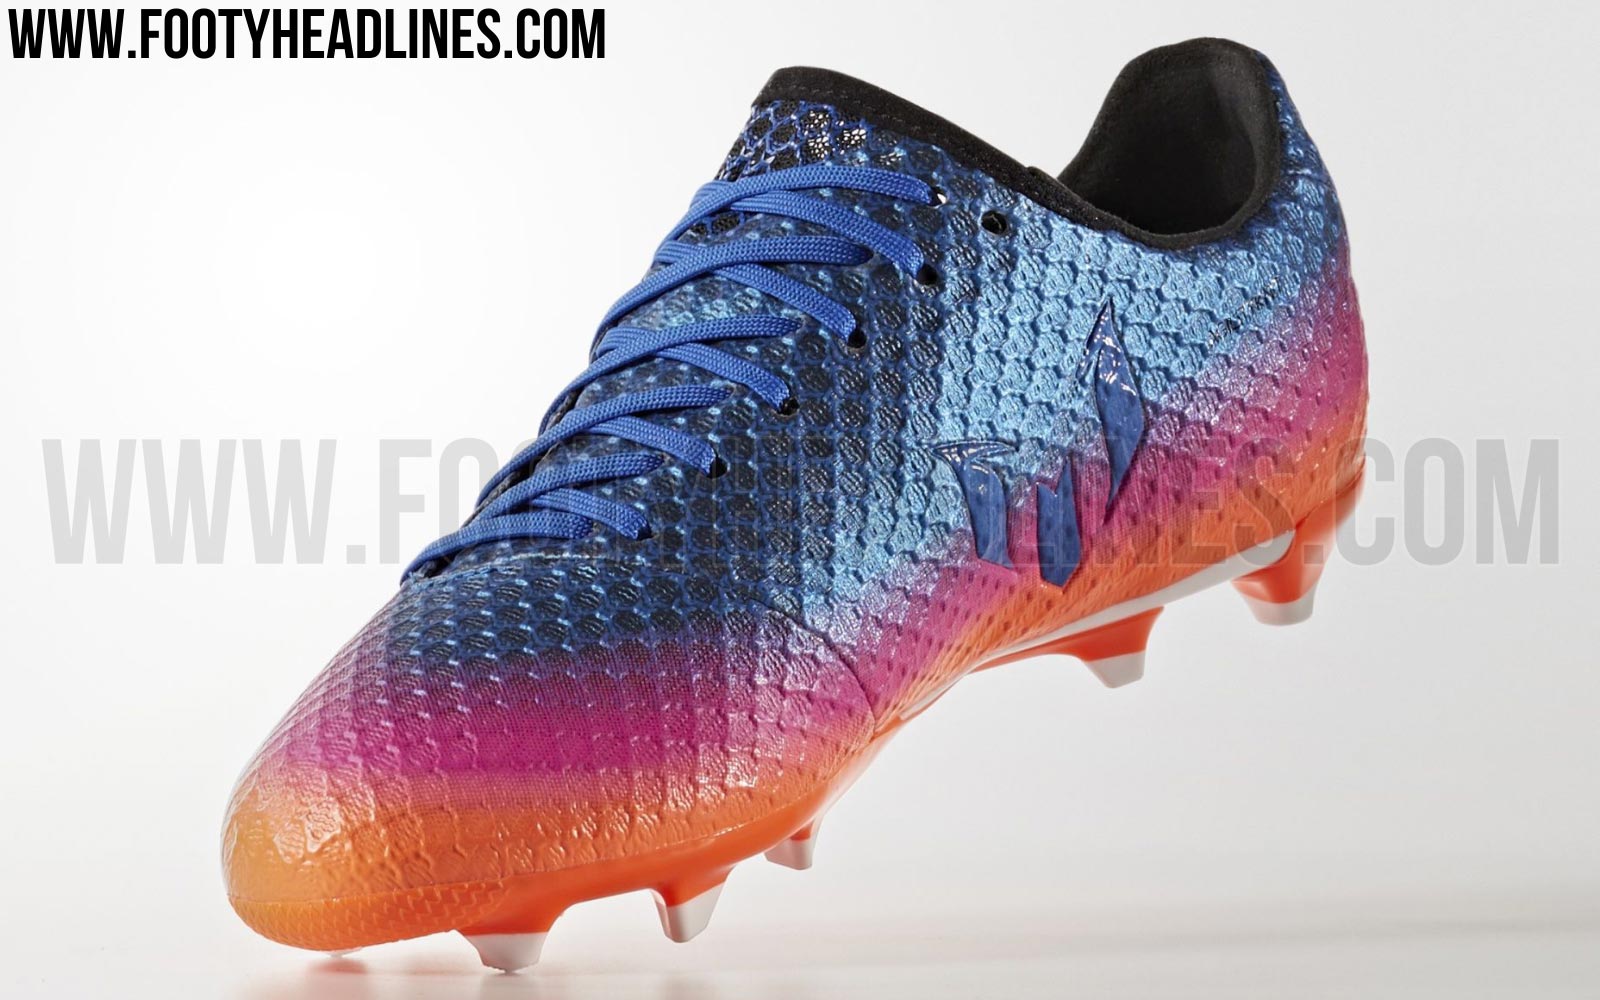 adidas messi boots 2017